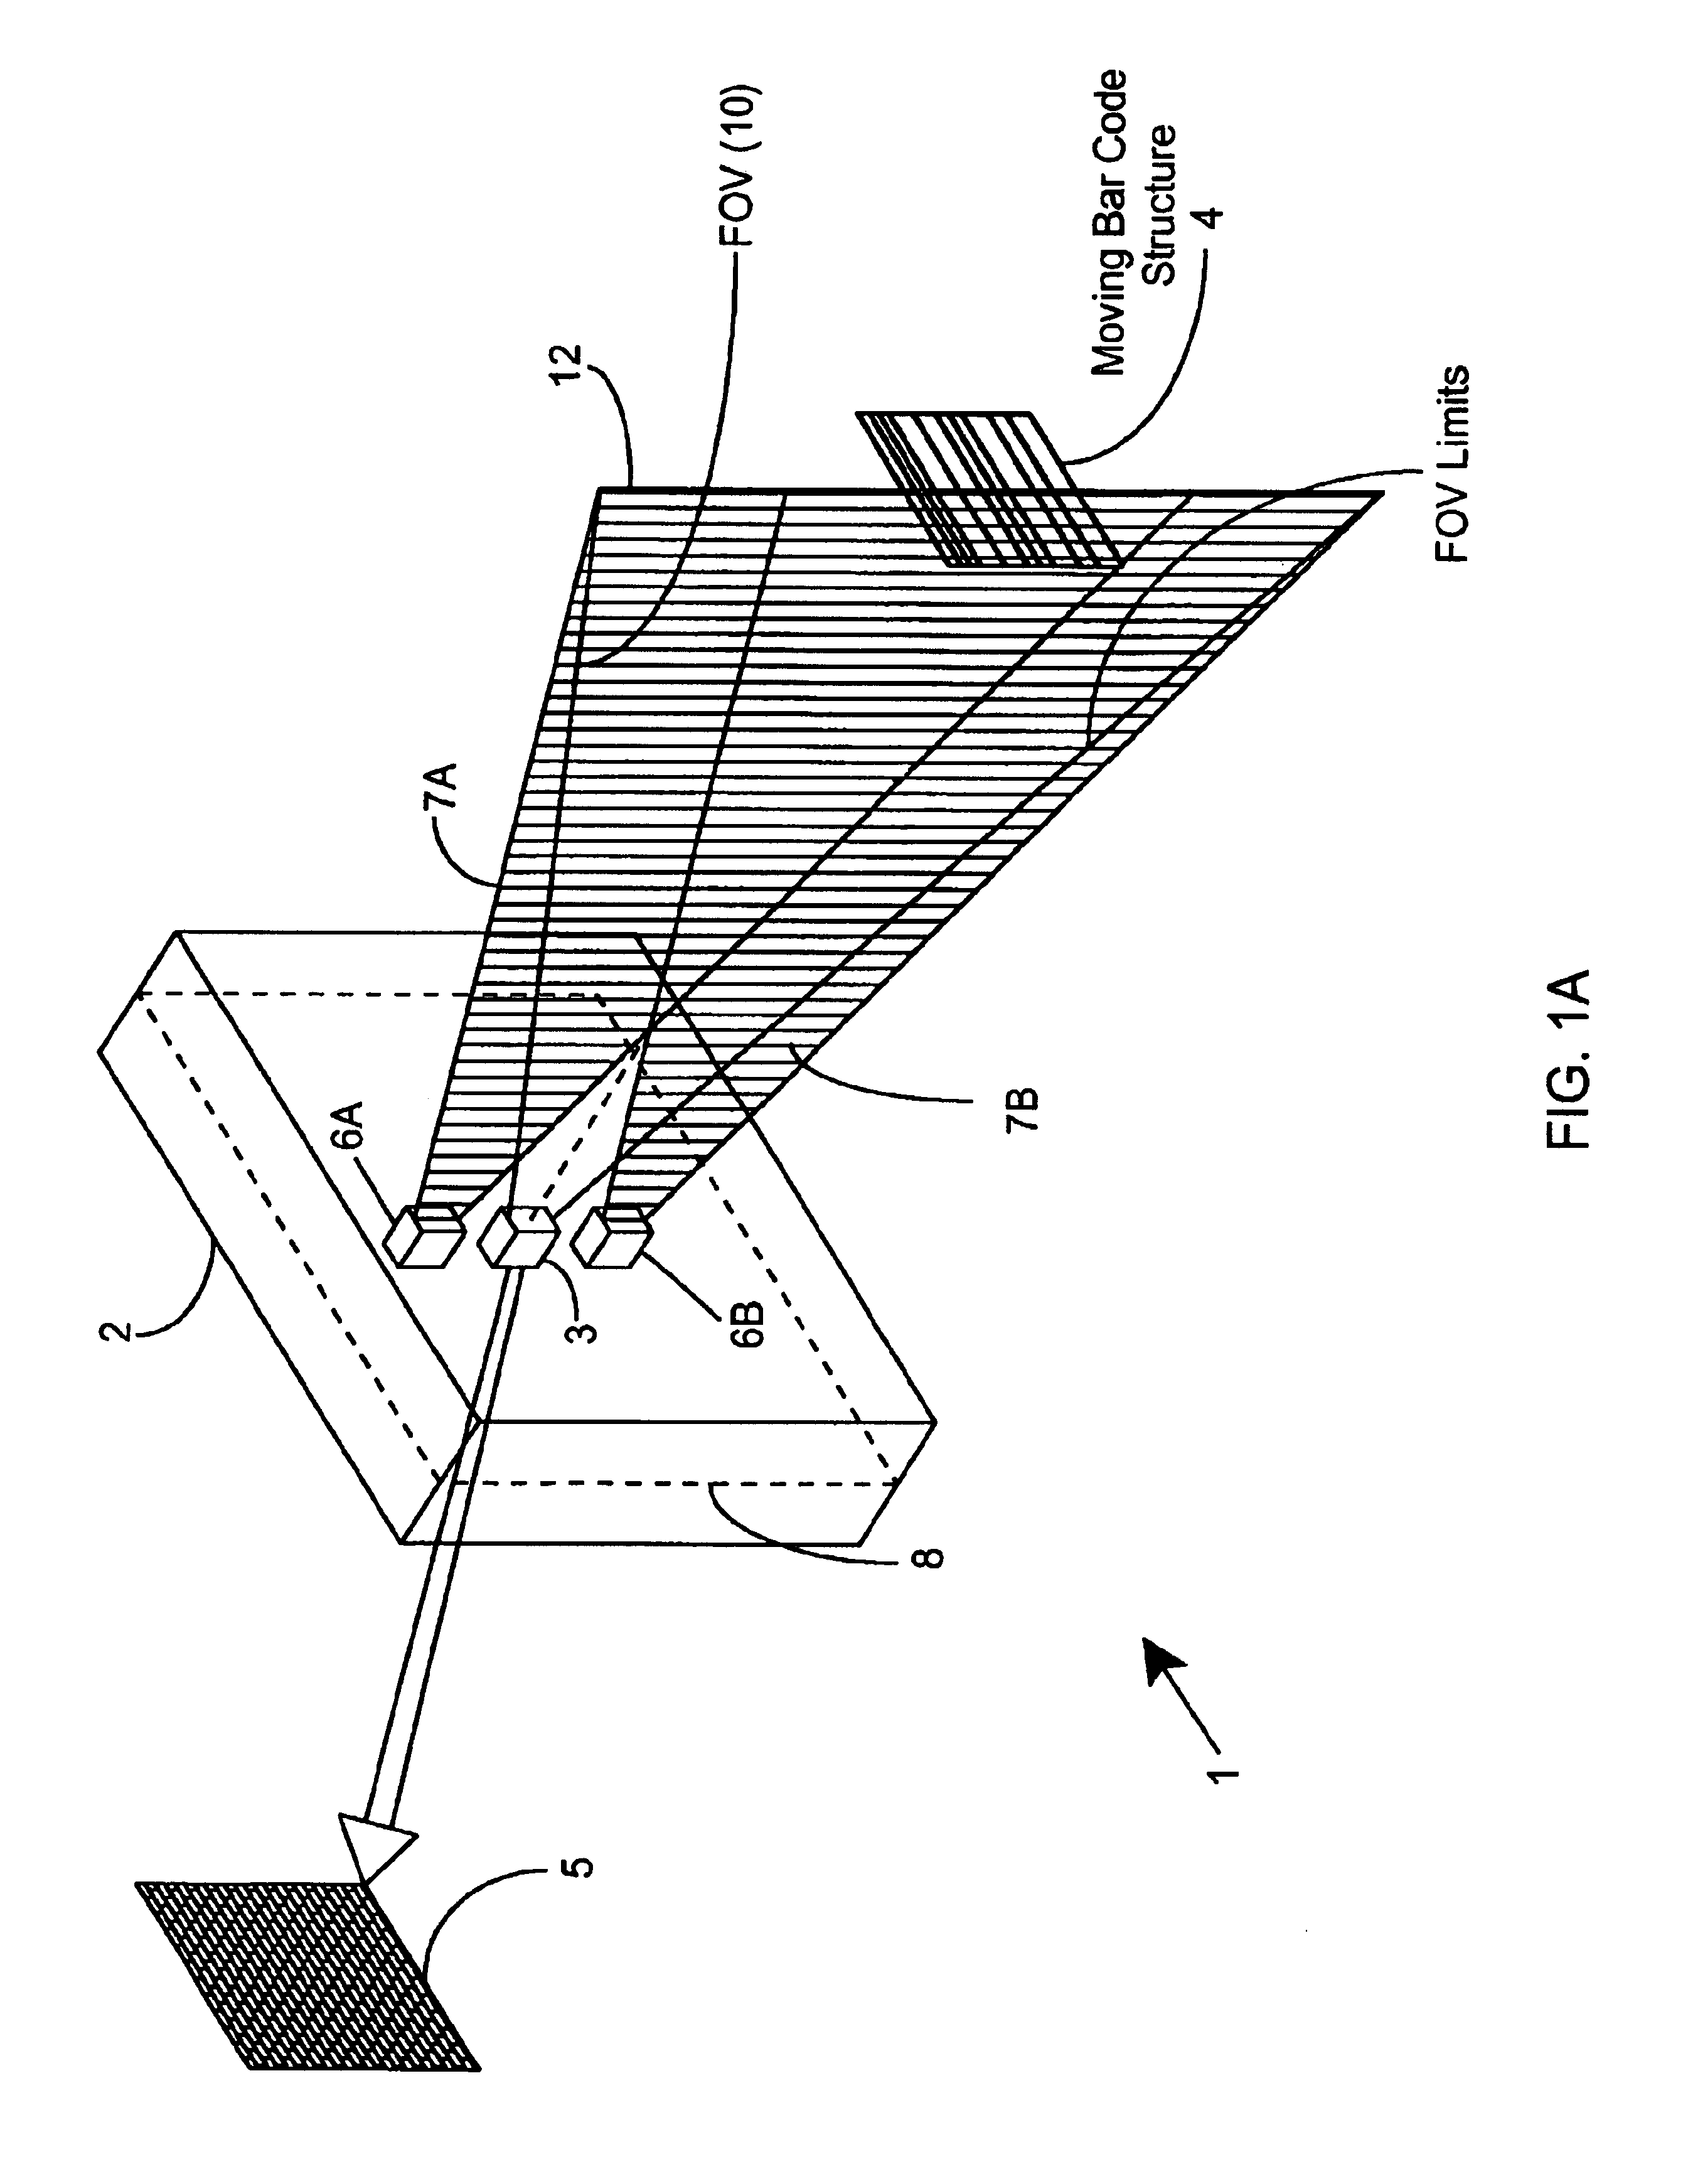 Method of and system for producing digital images of objects with subtantially reduced speckle-noise patterns by illuminating said objects with spatially and/or temporally coherent-reduced planar laser illumination